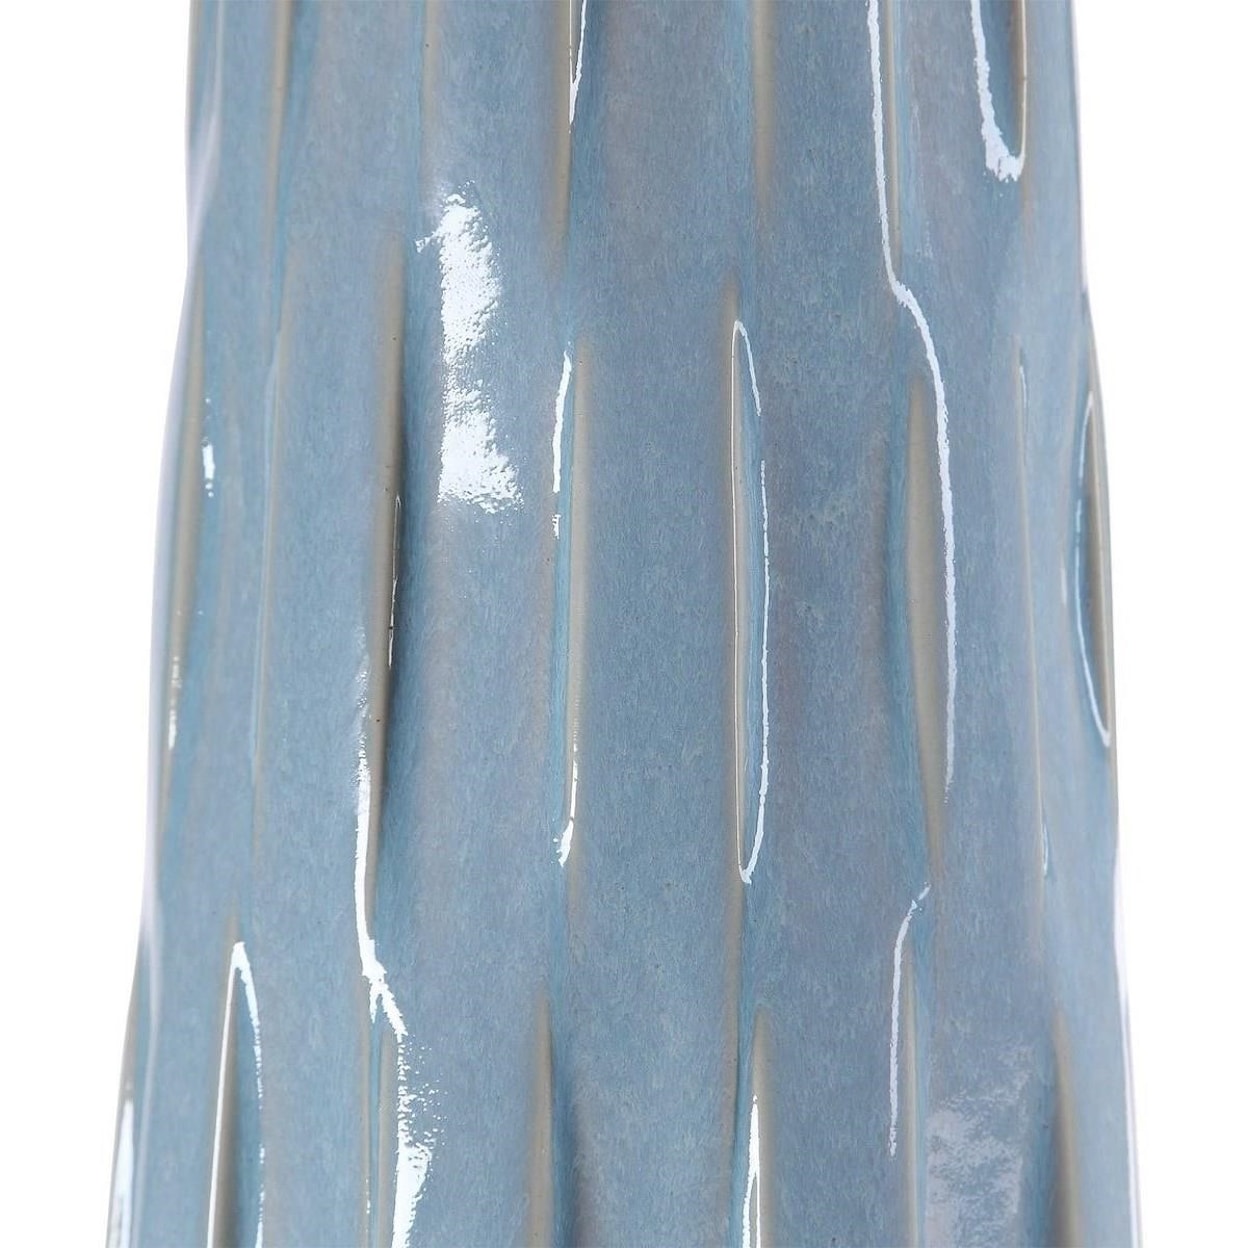 Uttermost Table Lamps Brienne Light Blue Table Lamp